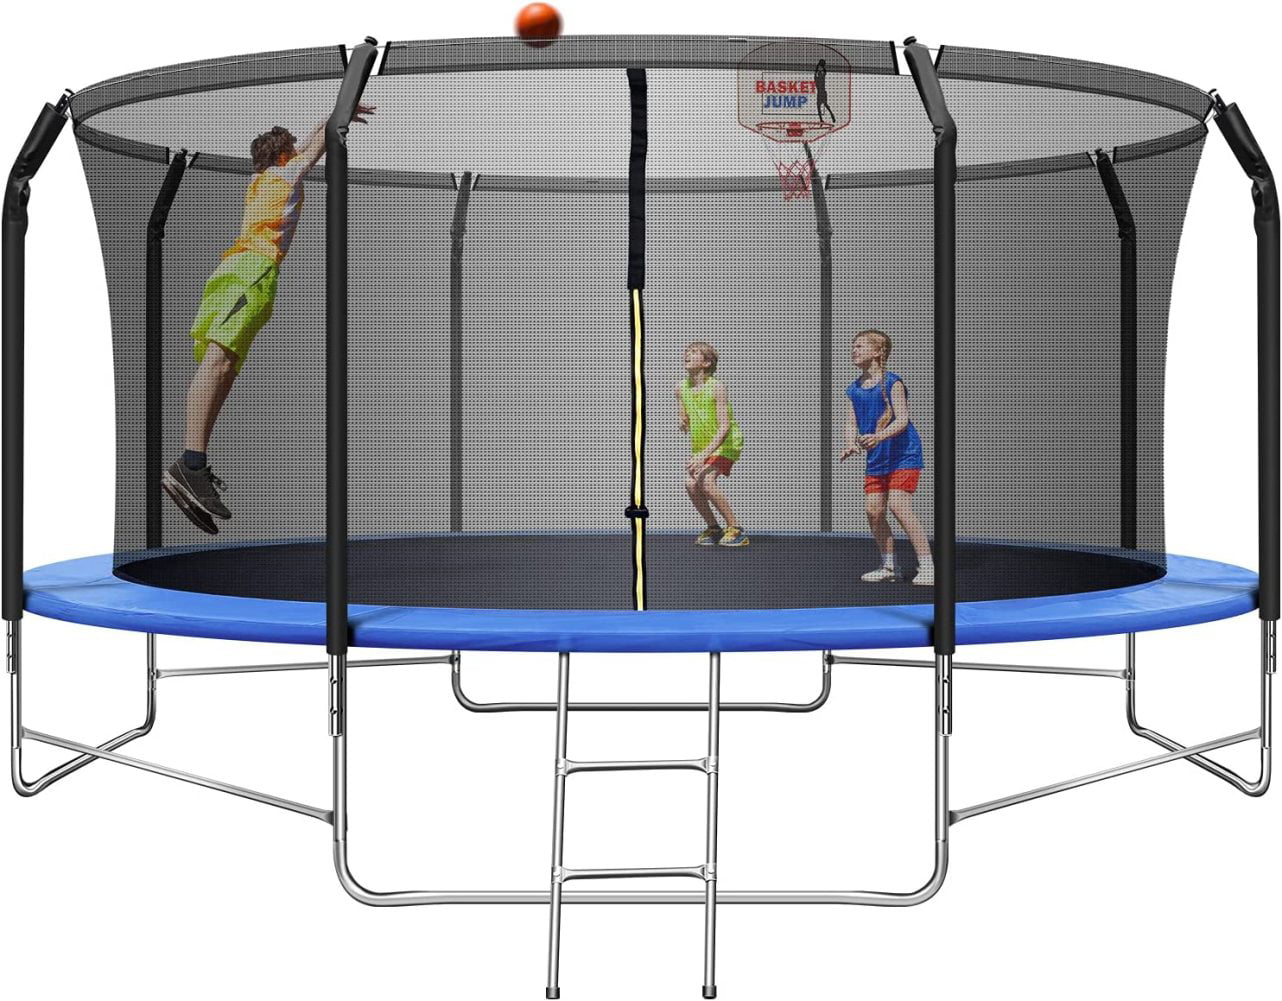 Outdoor Trampoline for Adults & Kids with Wind Stakes Upgraded 14 16 FT Trampoline with Basketball Hoop Jump Mat & Spring Cover Recreational Trampoline with Unique Balance Bar and Enclosure Net 